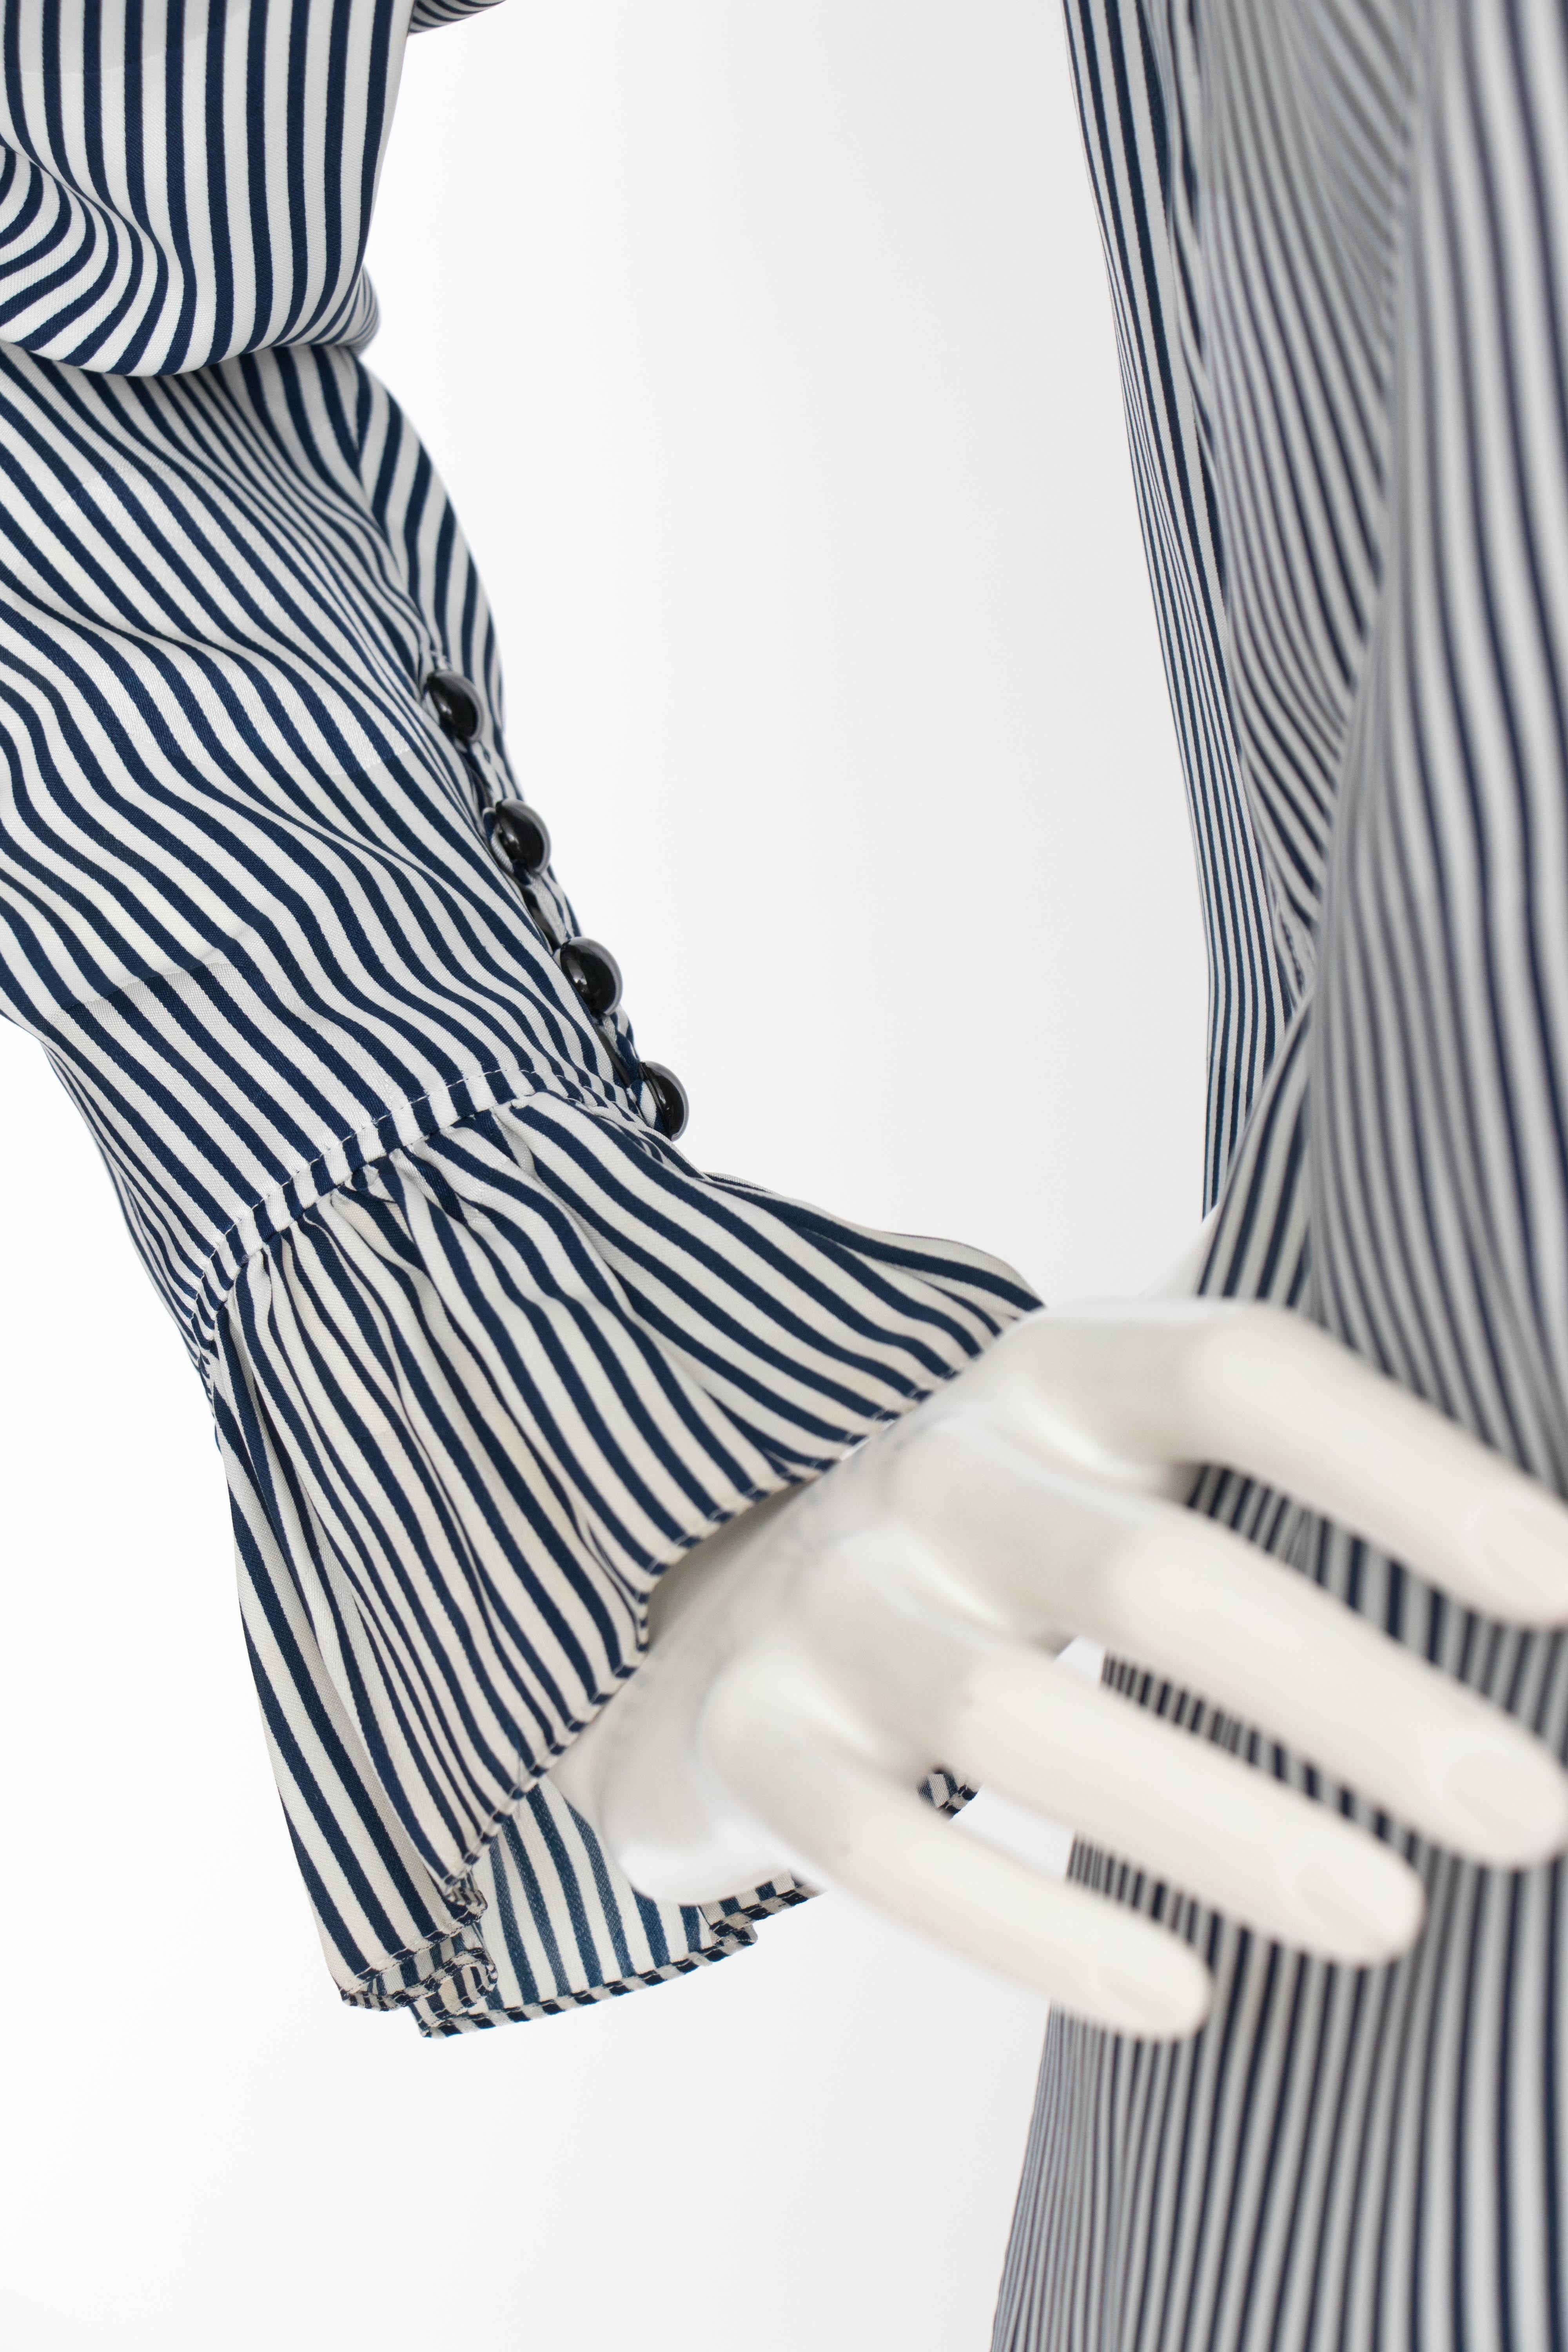 A 1980s Yves Saint Lauren blue and white stripe silk blouse with a ruffle collar and ruffle piping along each cuff. A subtle jacquard weave makes illusionist circles across the blouse. 

The size of the blouse corresponds to a modern size small, but